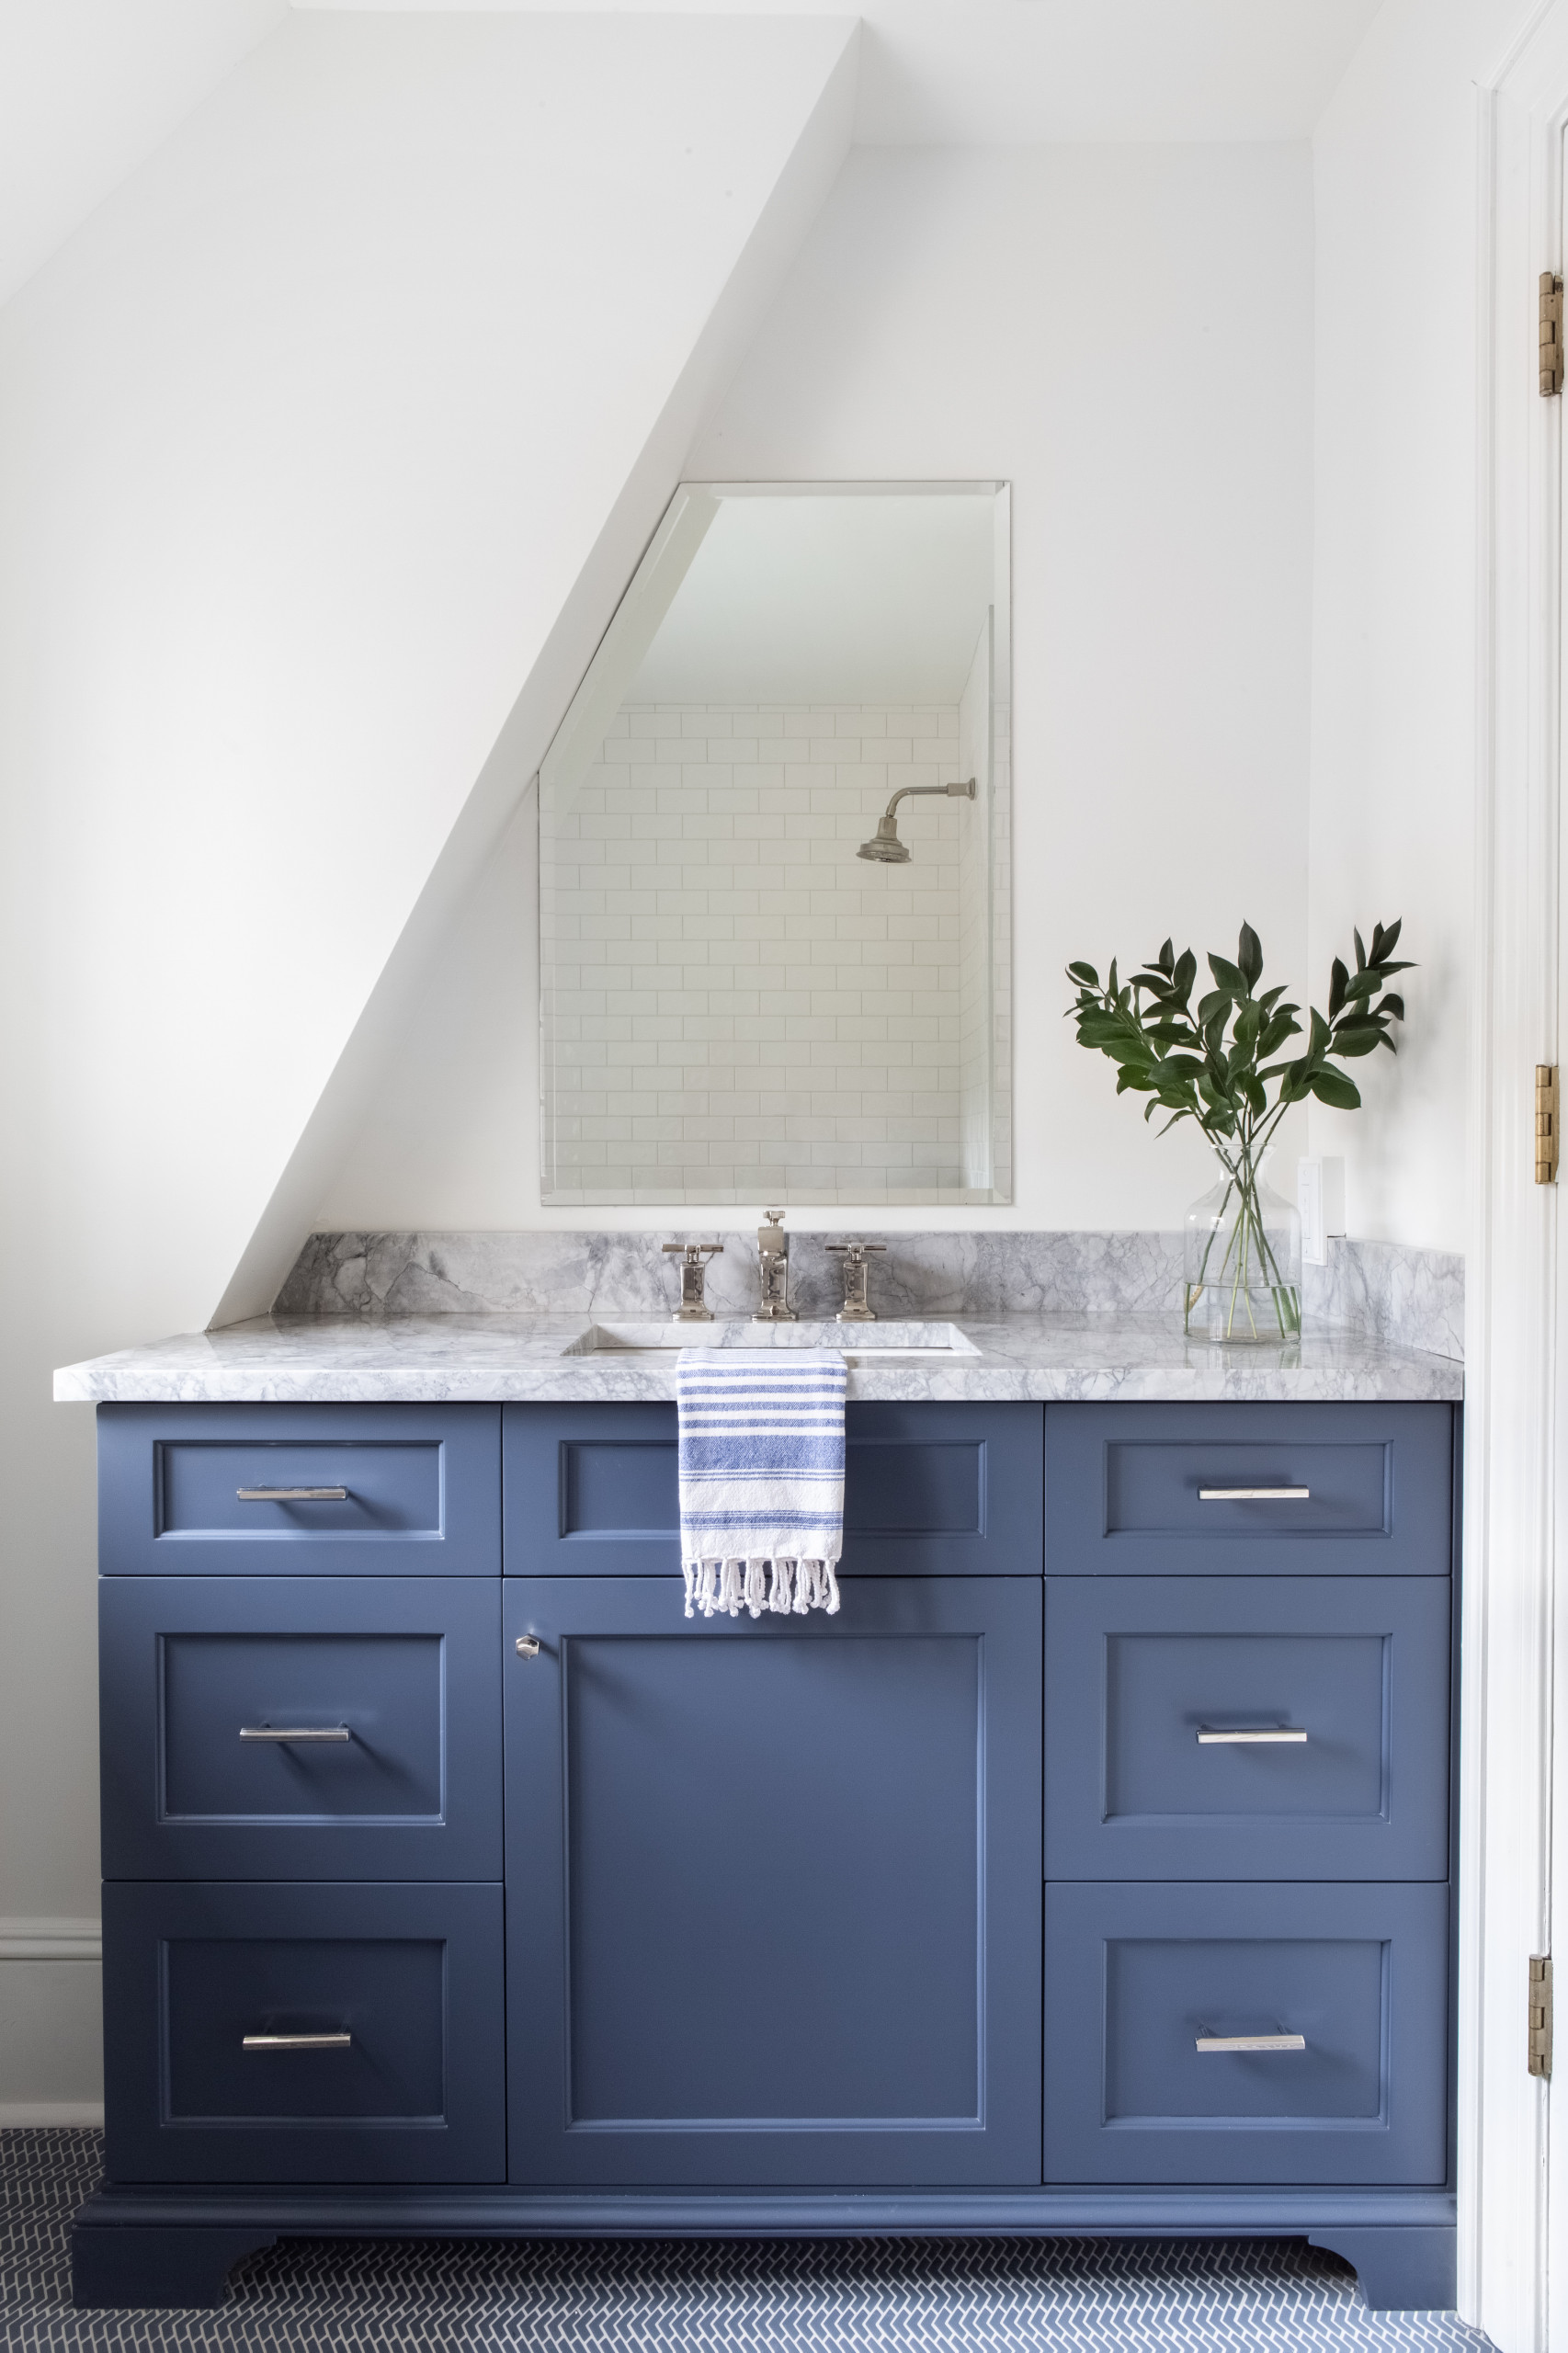 75 Beautiful Bath With Blue Cabinets And Gray Countertops Pictures Ideas July